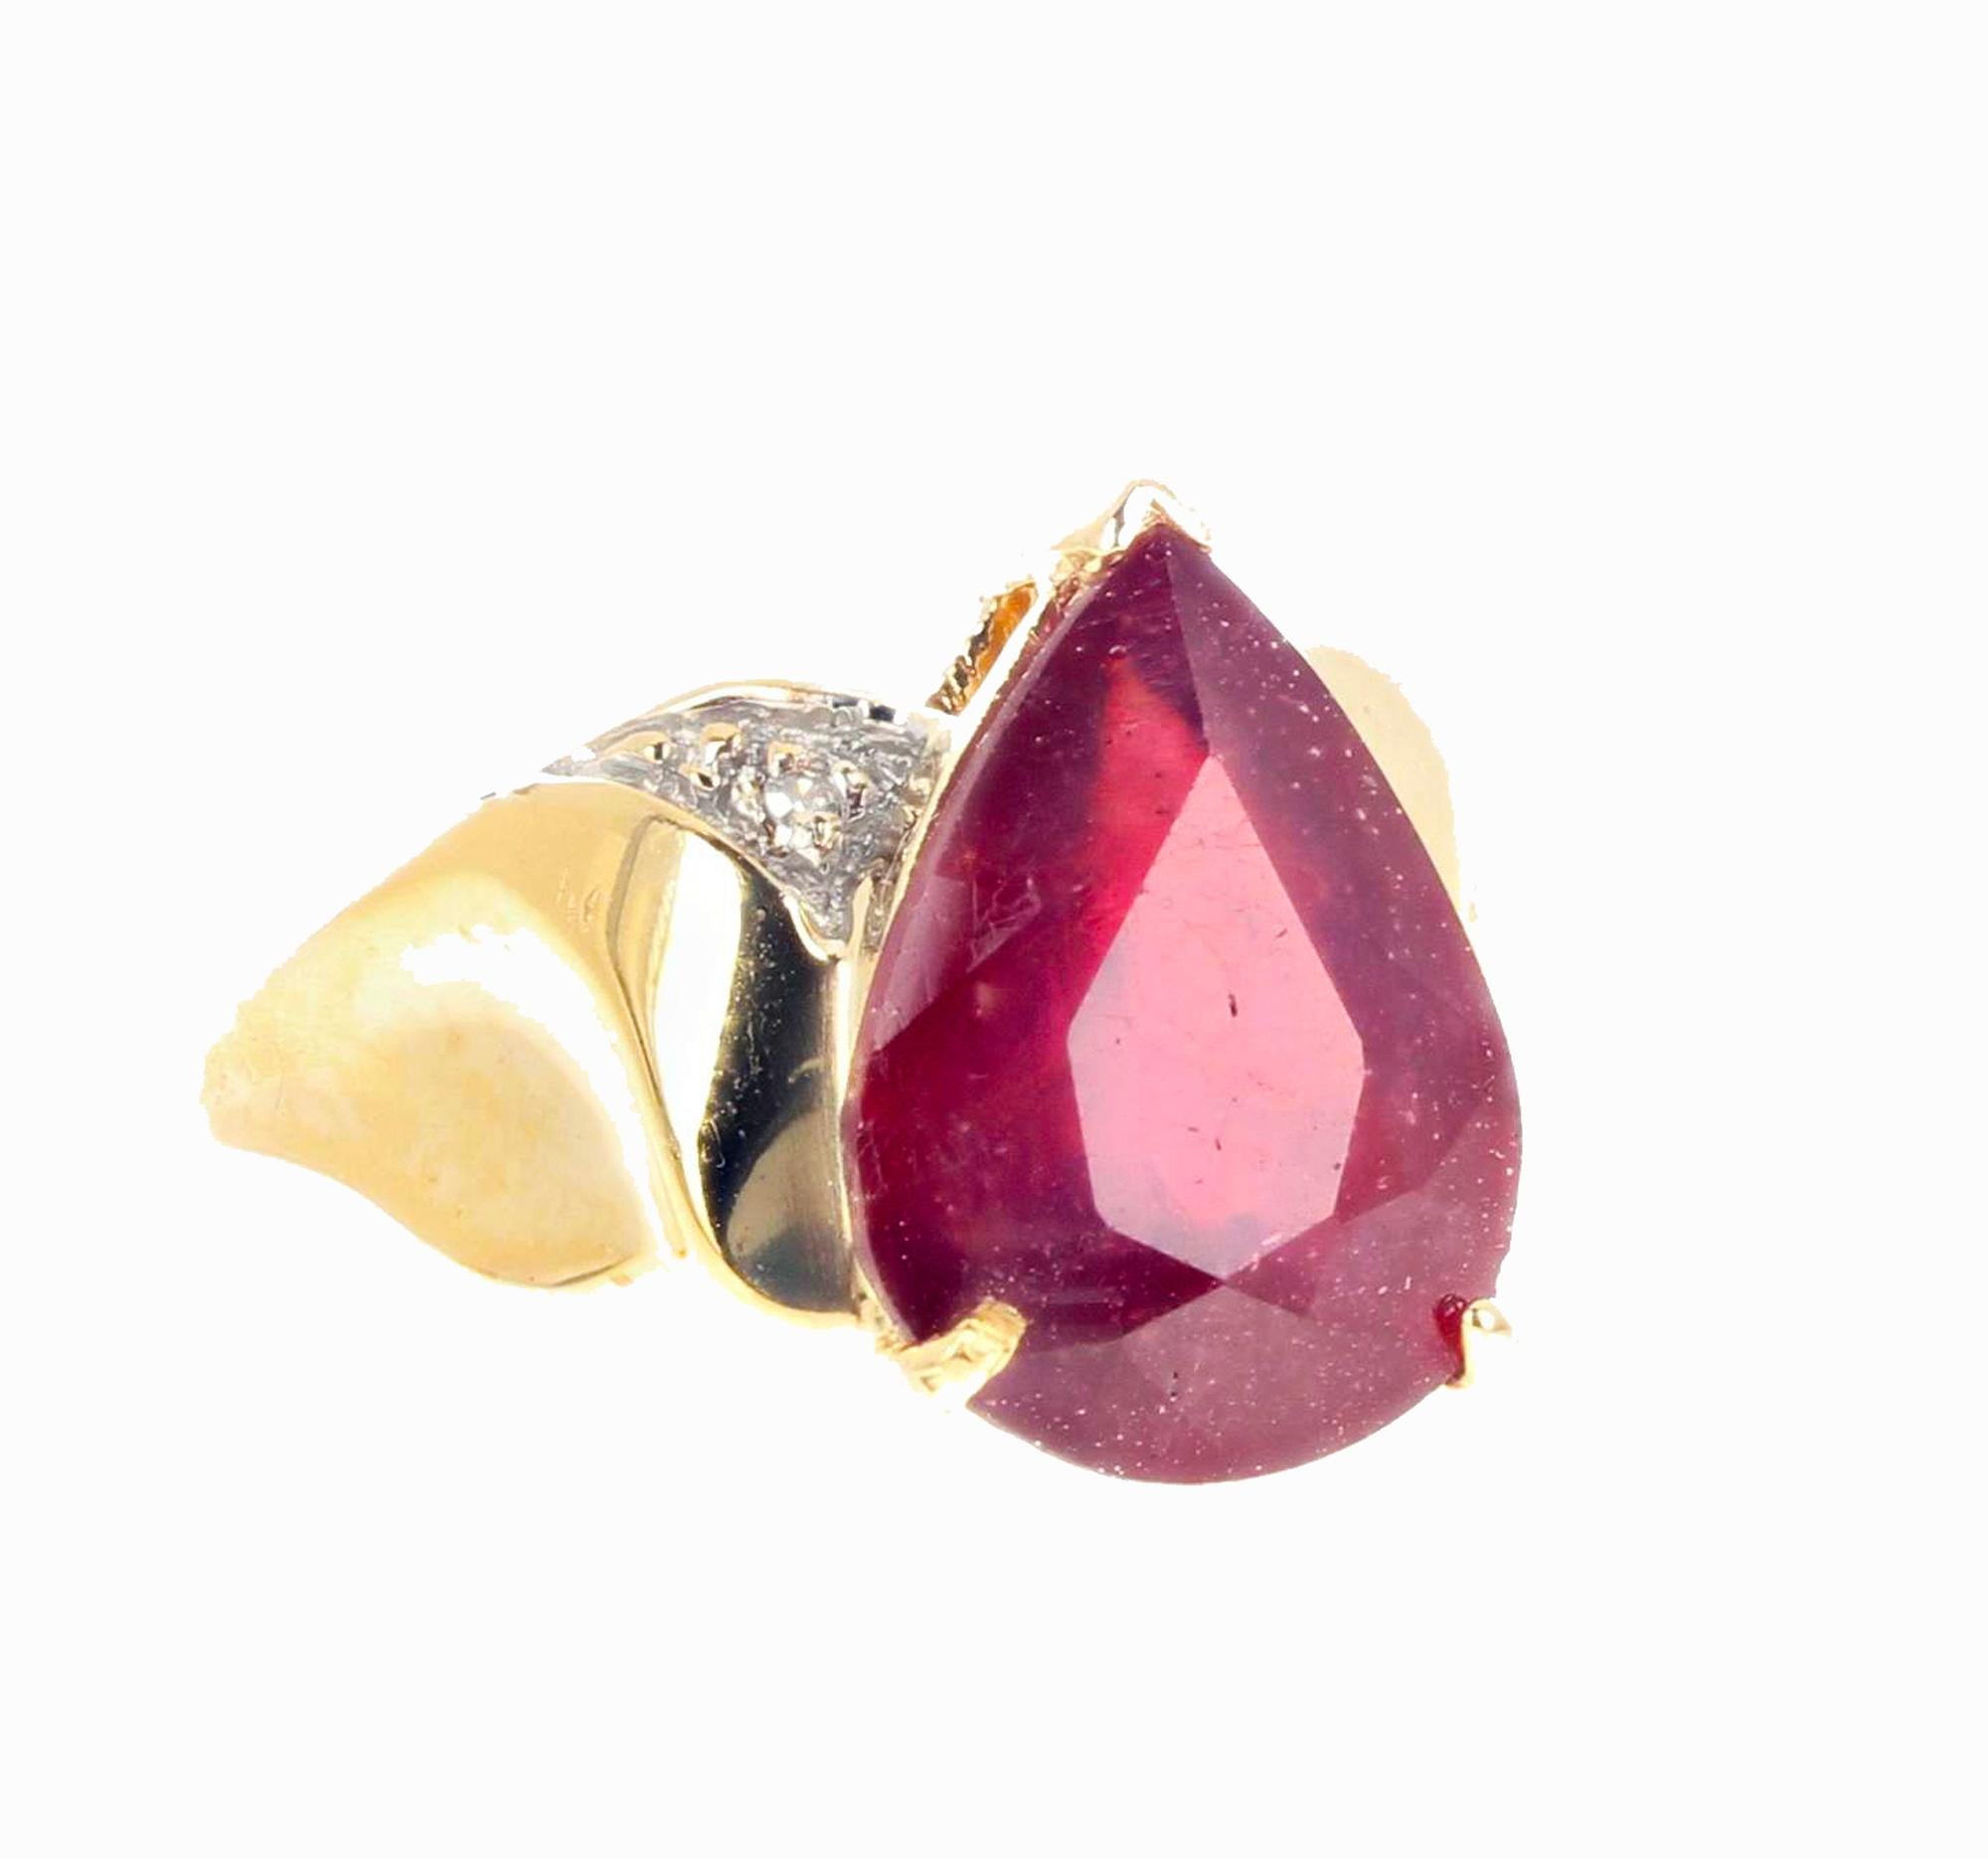 This intensely red natural 7.78 carat Sapphire (14.4mm x 10.8mm) is enhanced with teeny tiny real white Diamond side stones in this elegant sophisticated 14K yellow gold ring size 7 sizable (we size for free). 